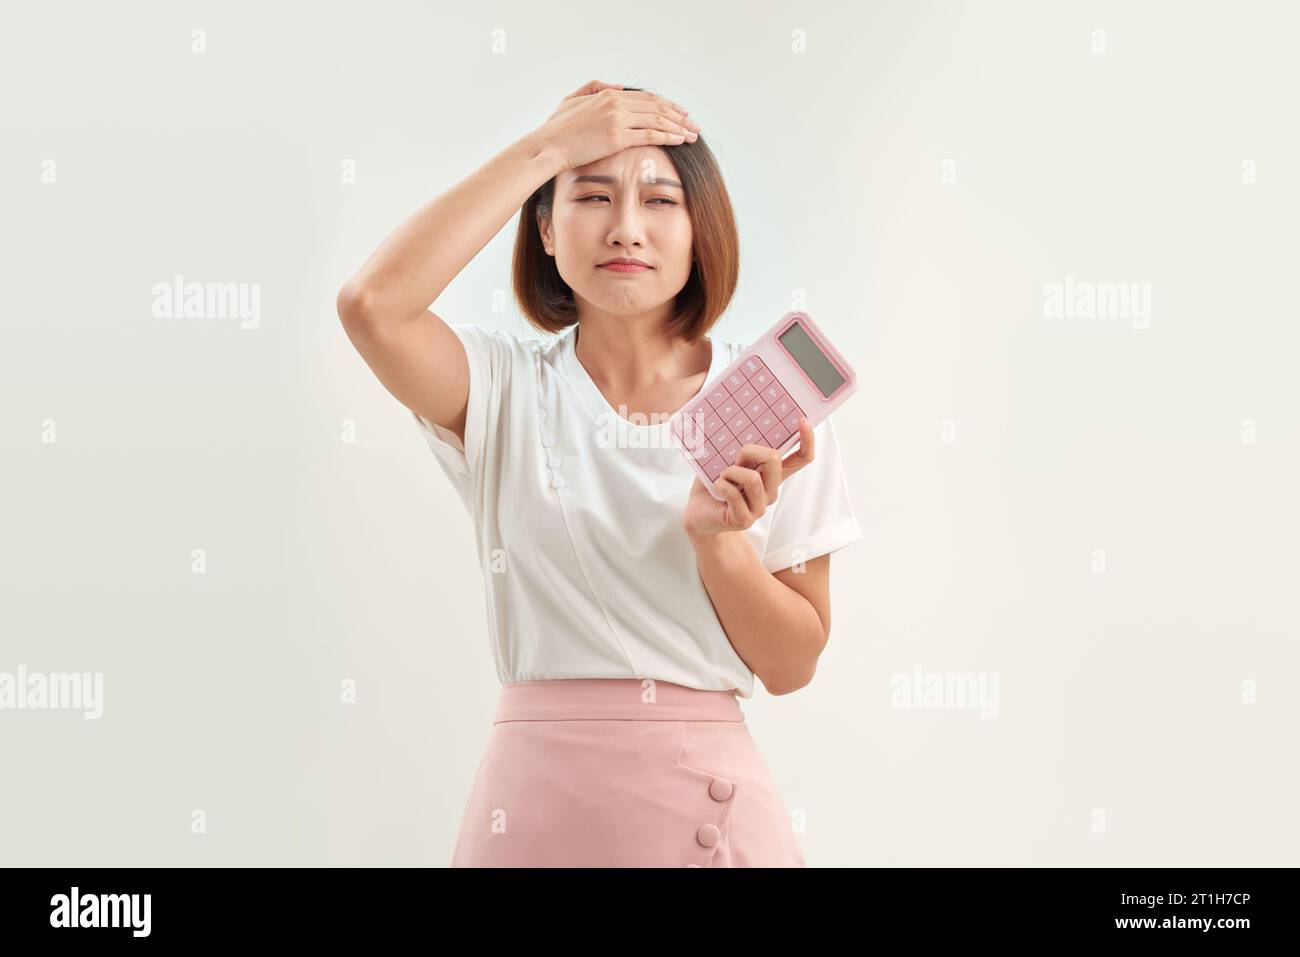 young attractive asian woman having an electronic calculator Stock Photo